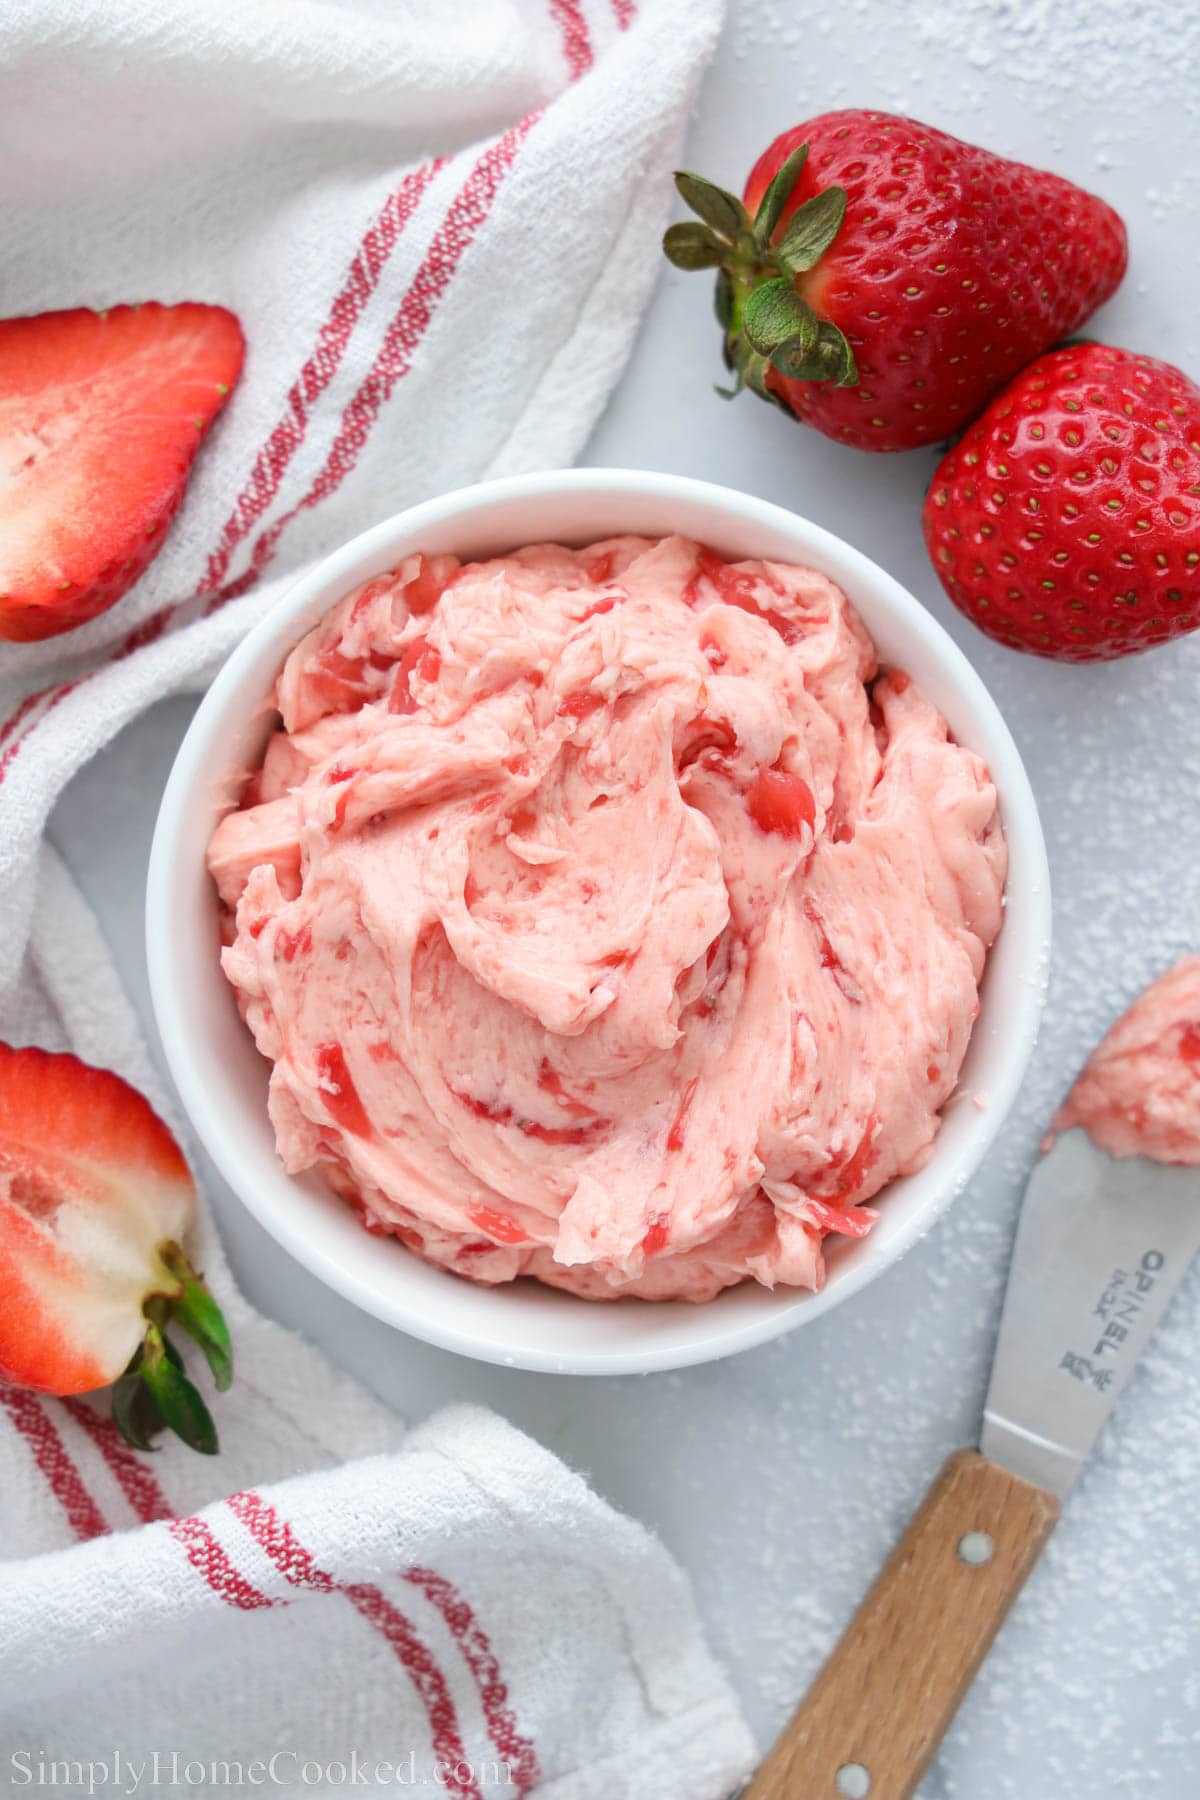 Bowl of Strawberry Butter with a knife and strawberries nearby.